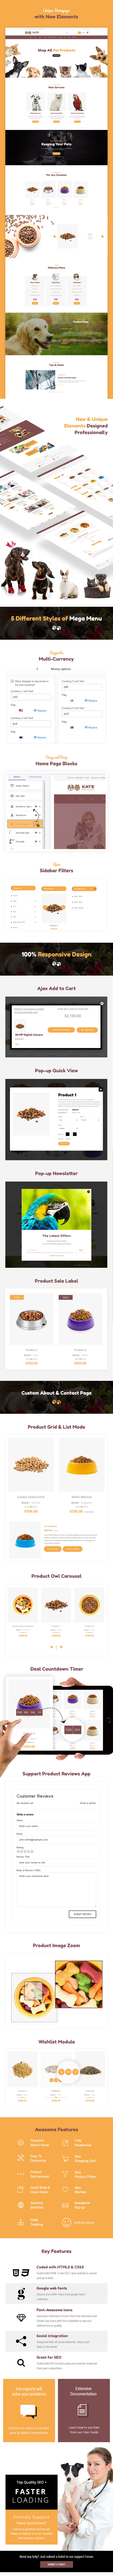 Kate - Pet Store and Pet Food Shopify Theme - 1